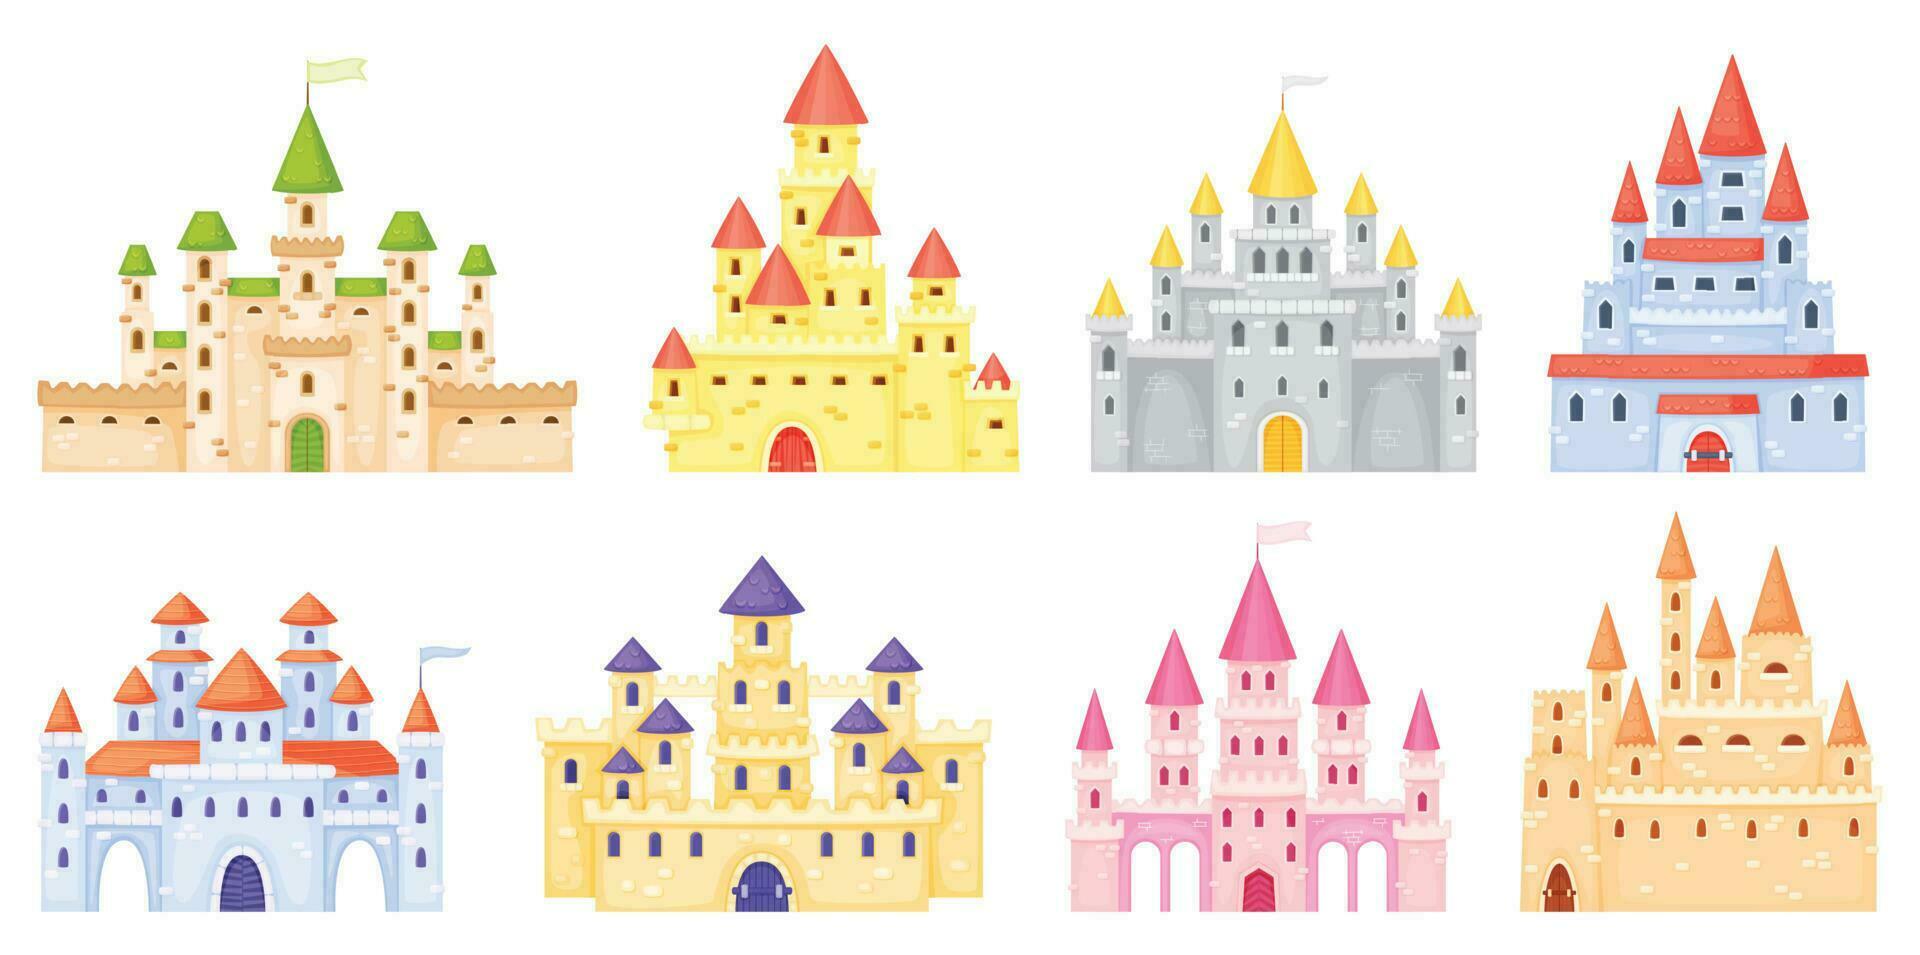 Cartoon medieval castles, fairytale princess castle towers. Fantasy kingdom magic palace, king fortress, gothic mansion exterior vector set